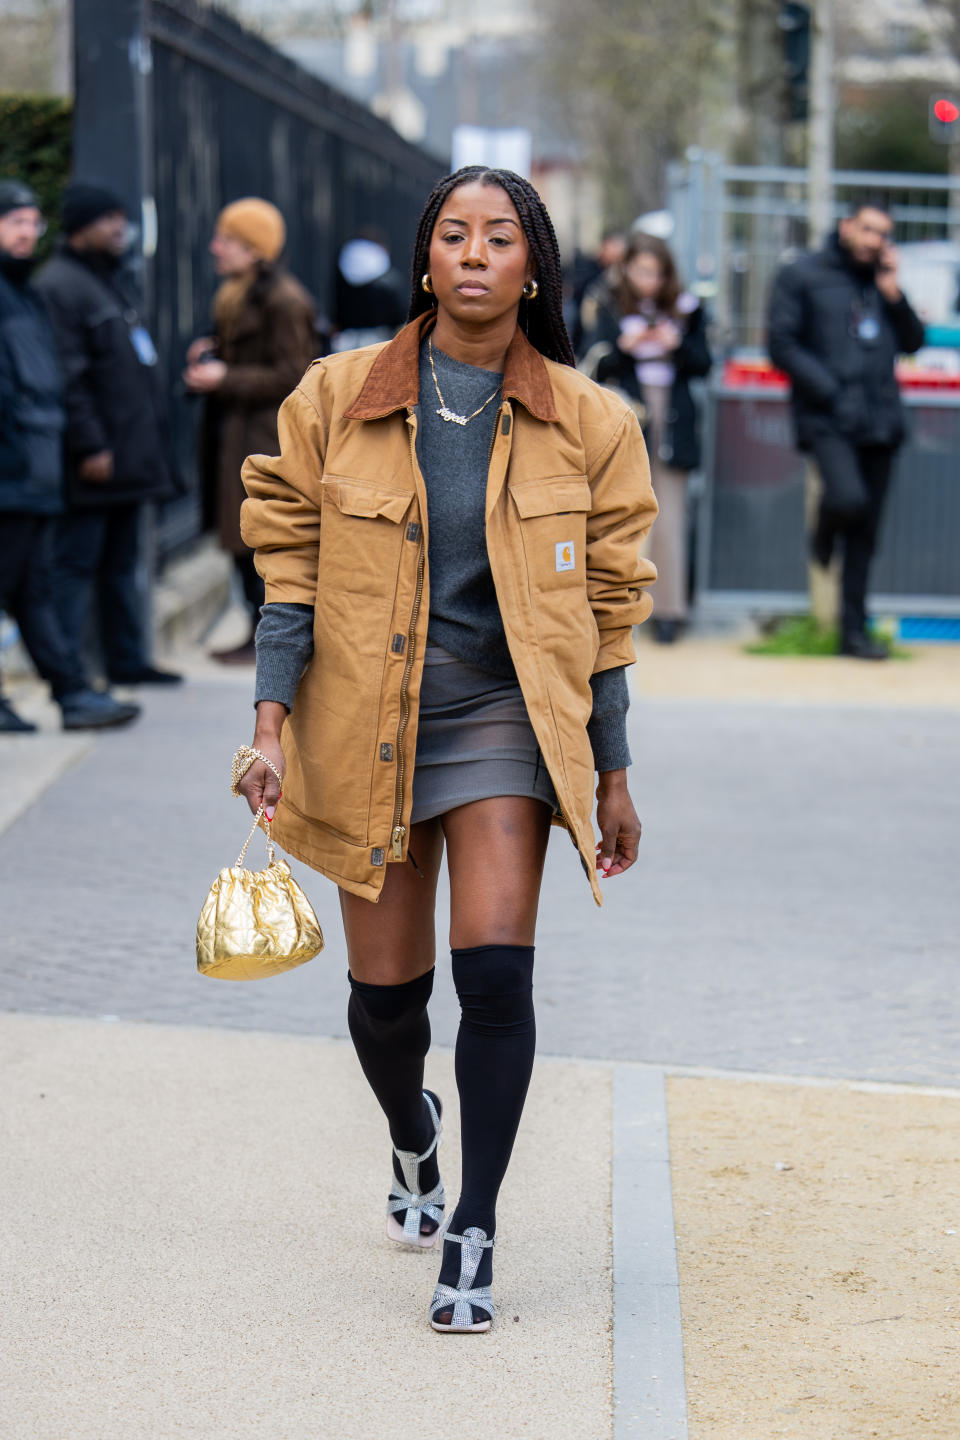 A guest at fashion week wearing a carhartt jcaket and knee socks